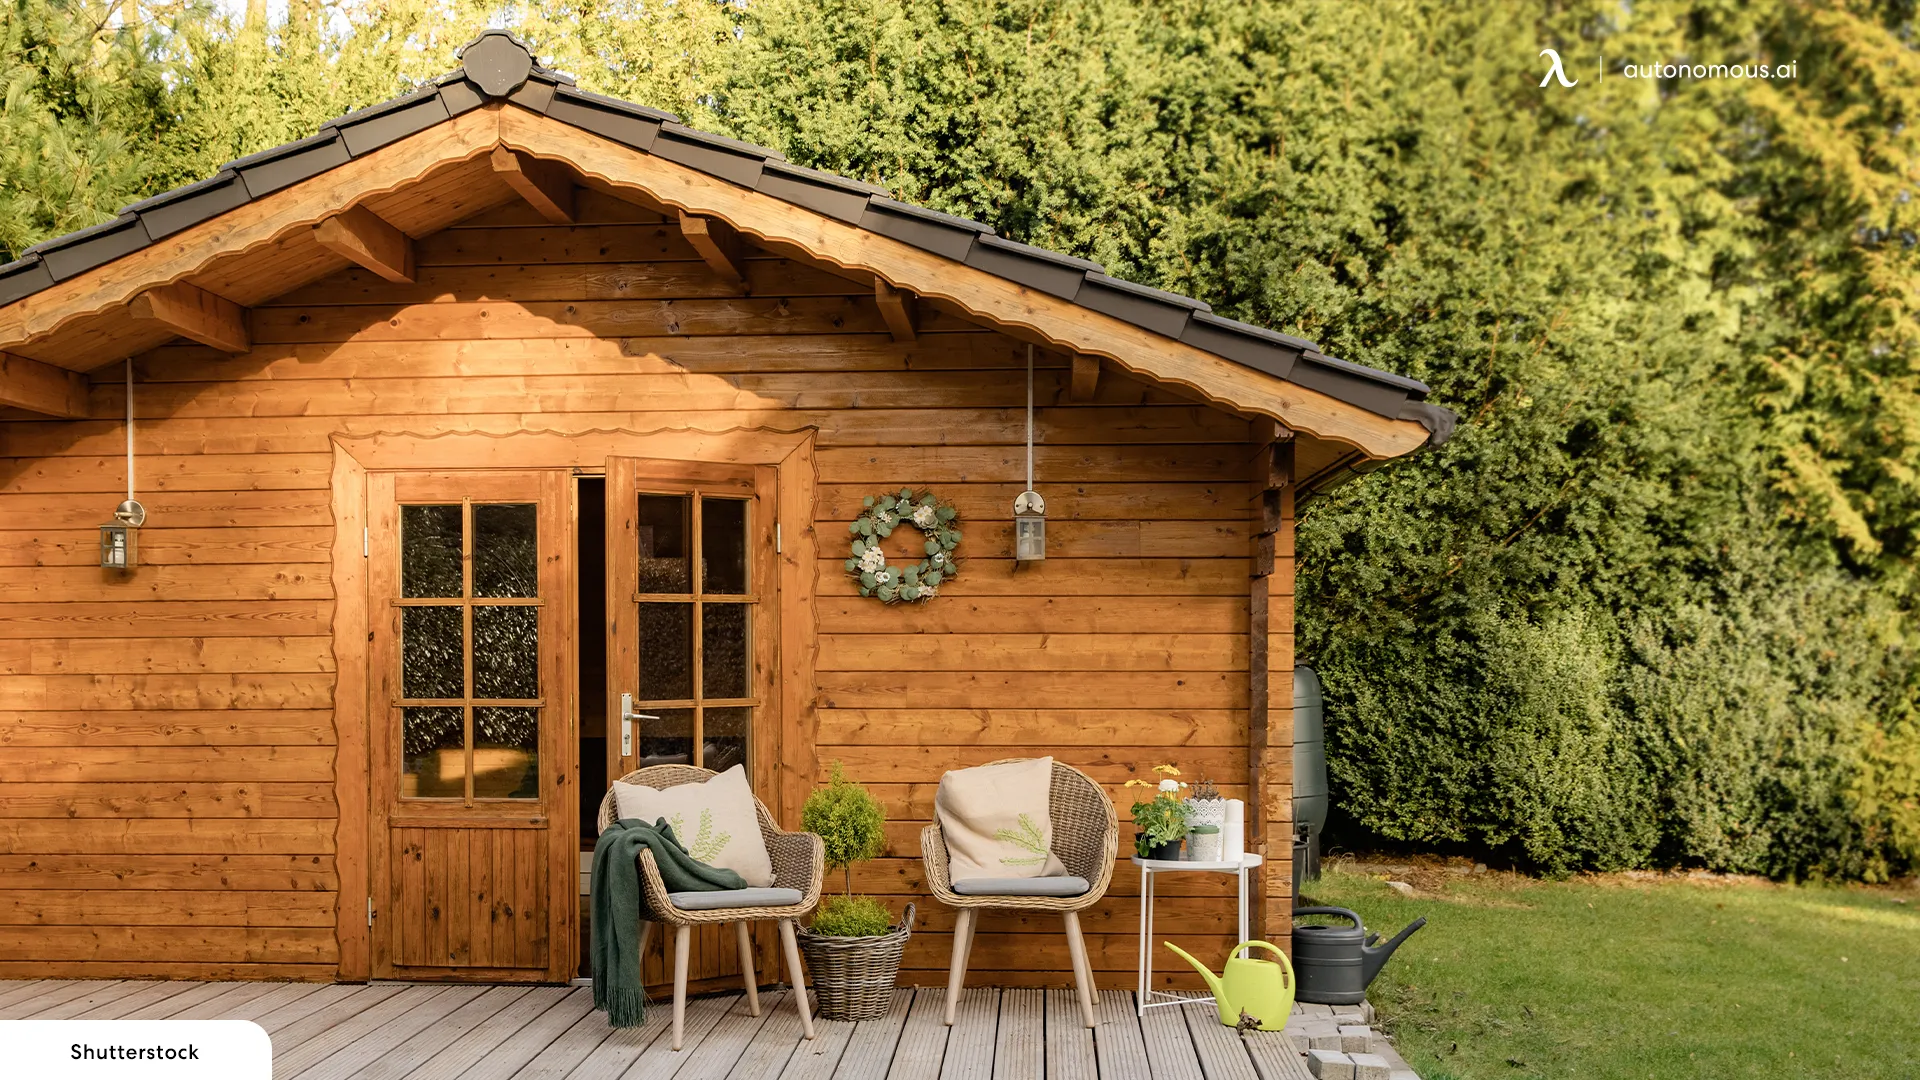 Mini Vacation Home - shed interior ideas